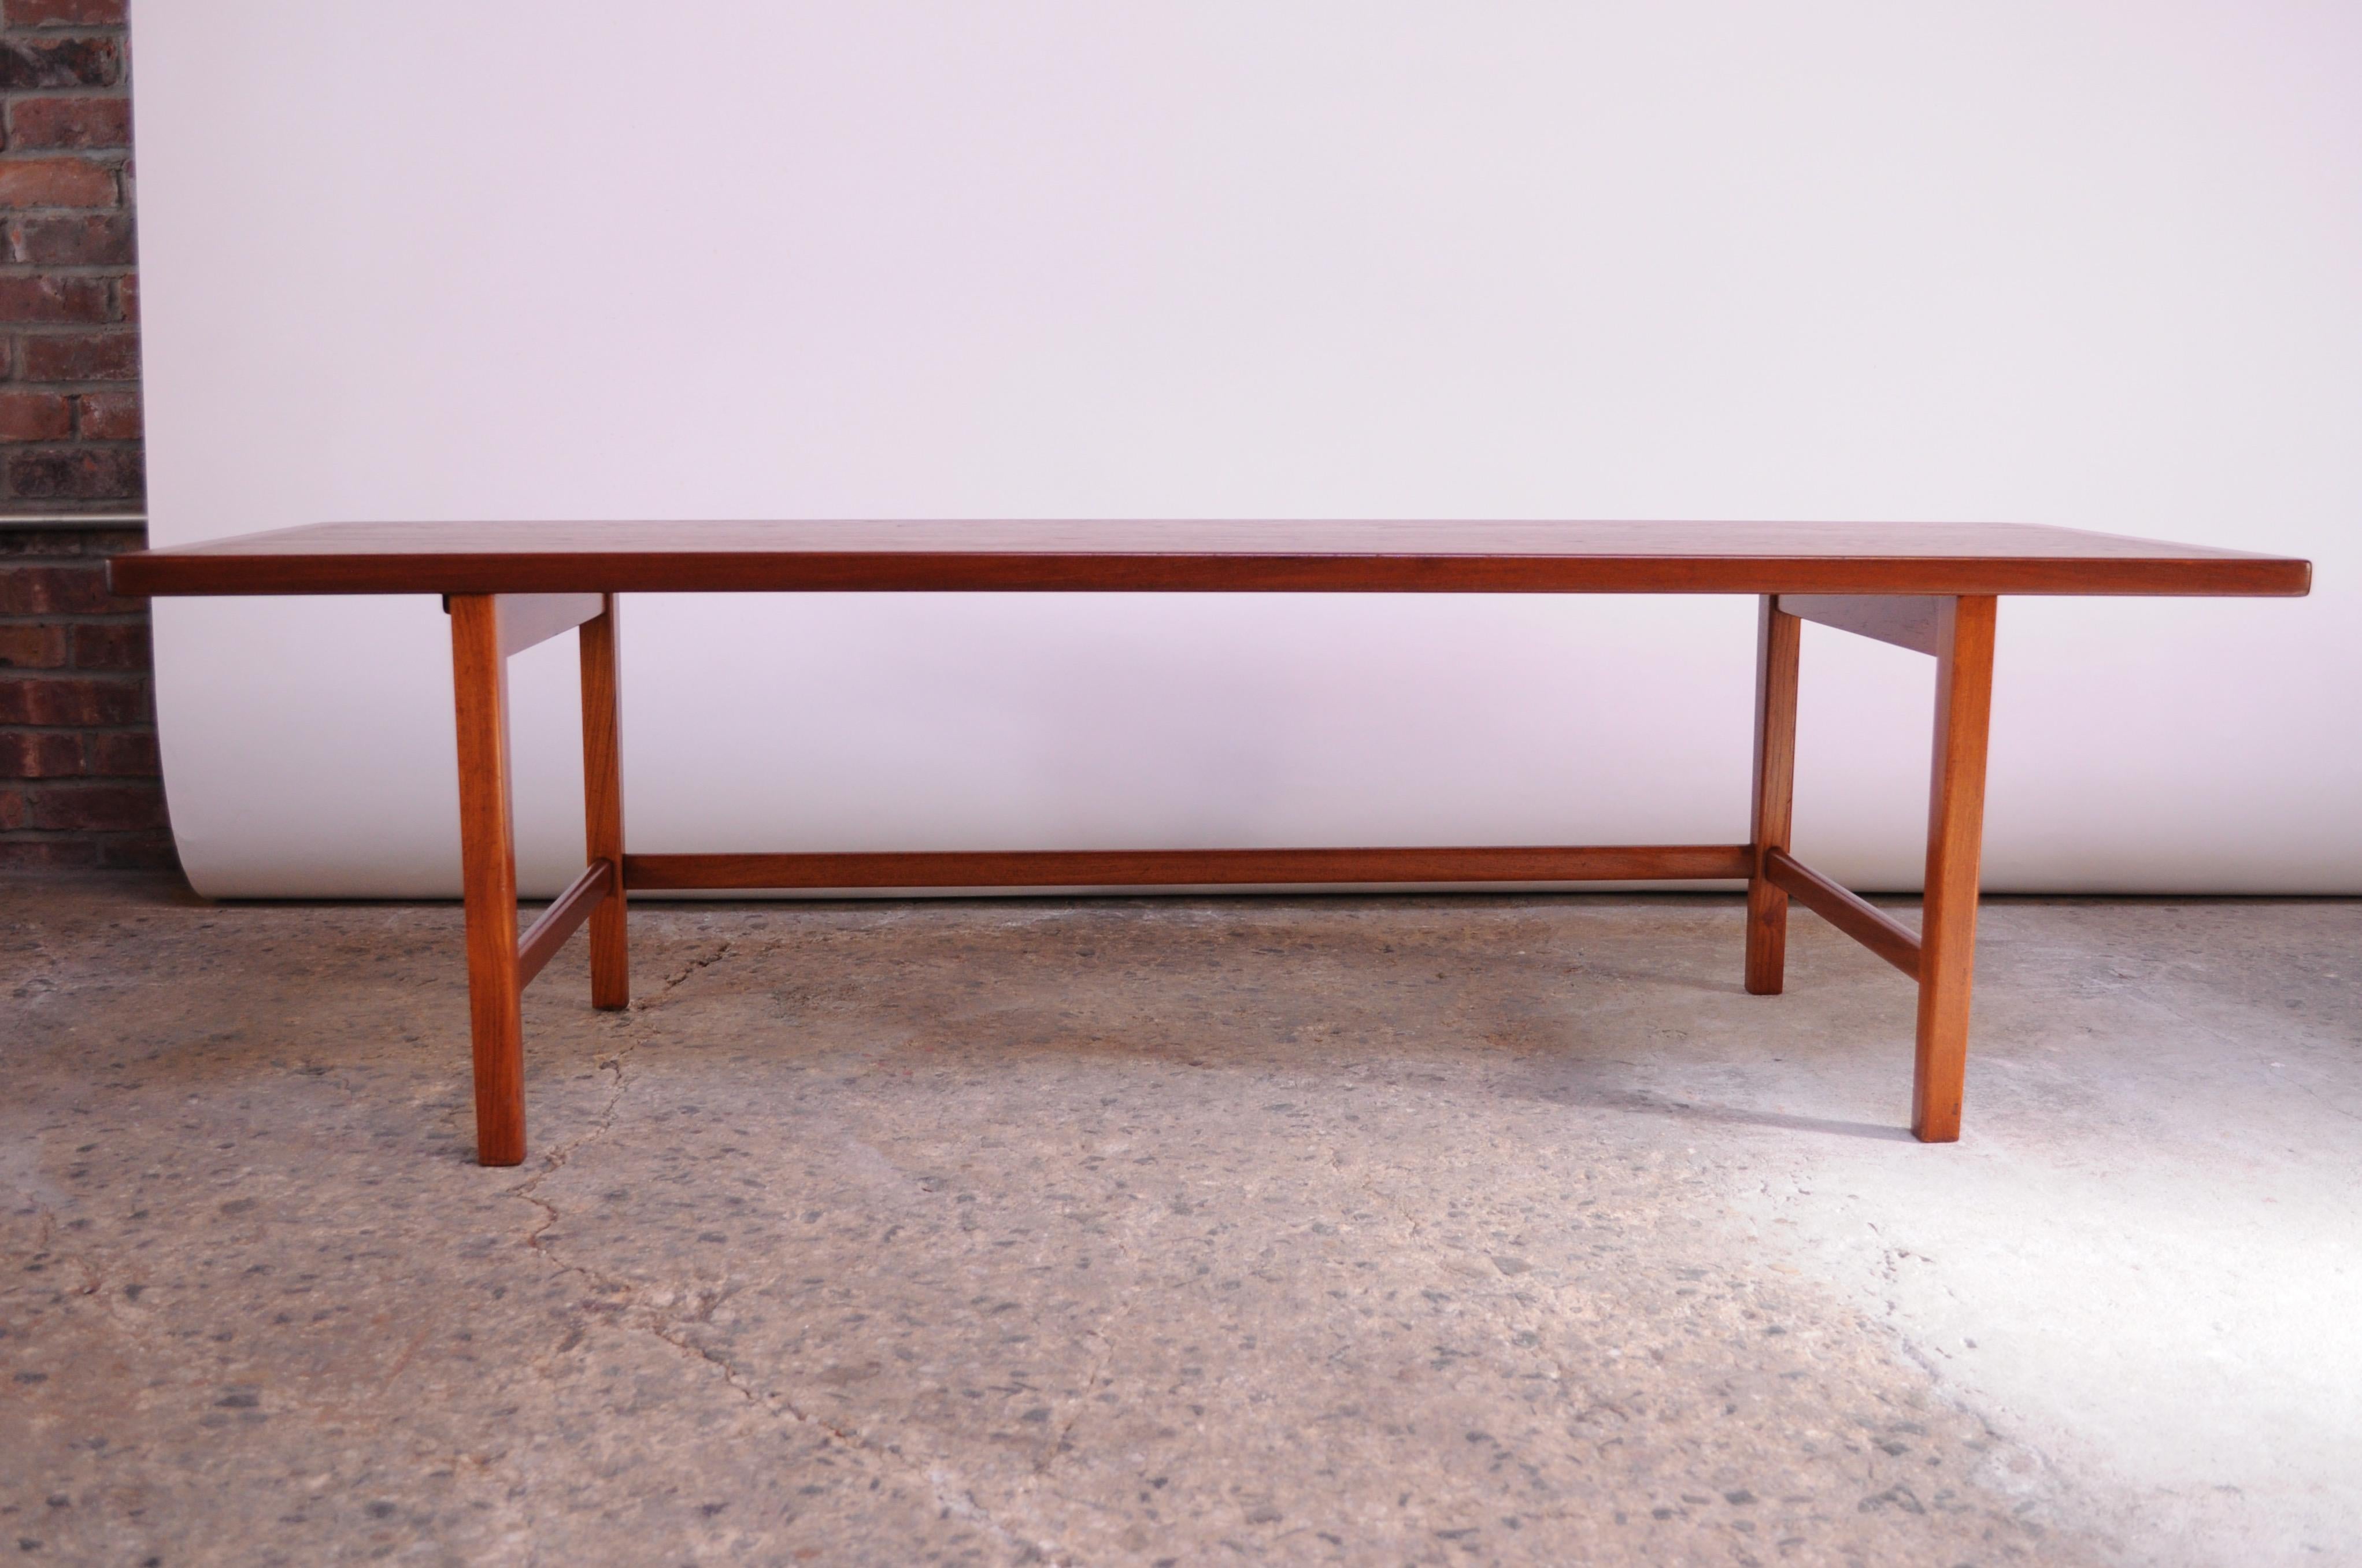 Dense Danish coffee table composed of a surface boasting vivid, rich teak veneer over solid wood with solid teak legs. Very well made and sturdy offering ample support to easily double as a bench. 
Conservatively restored condition; only minor wear